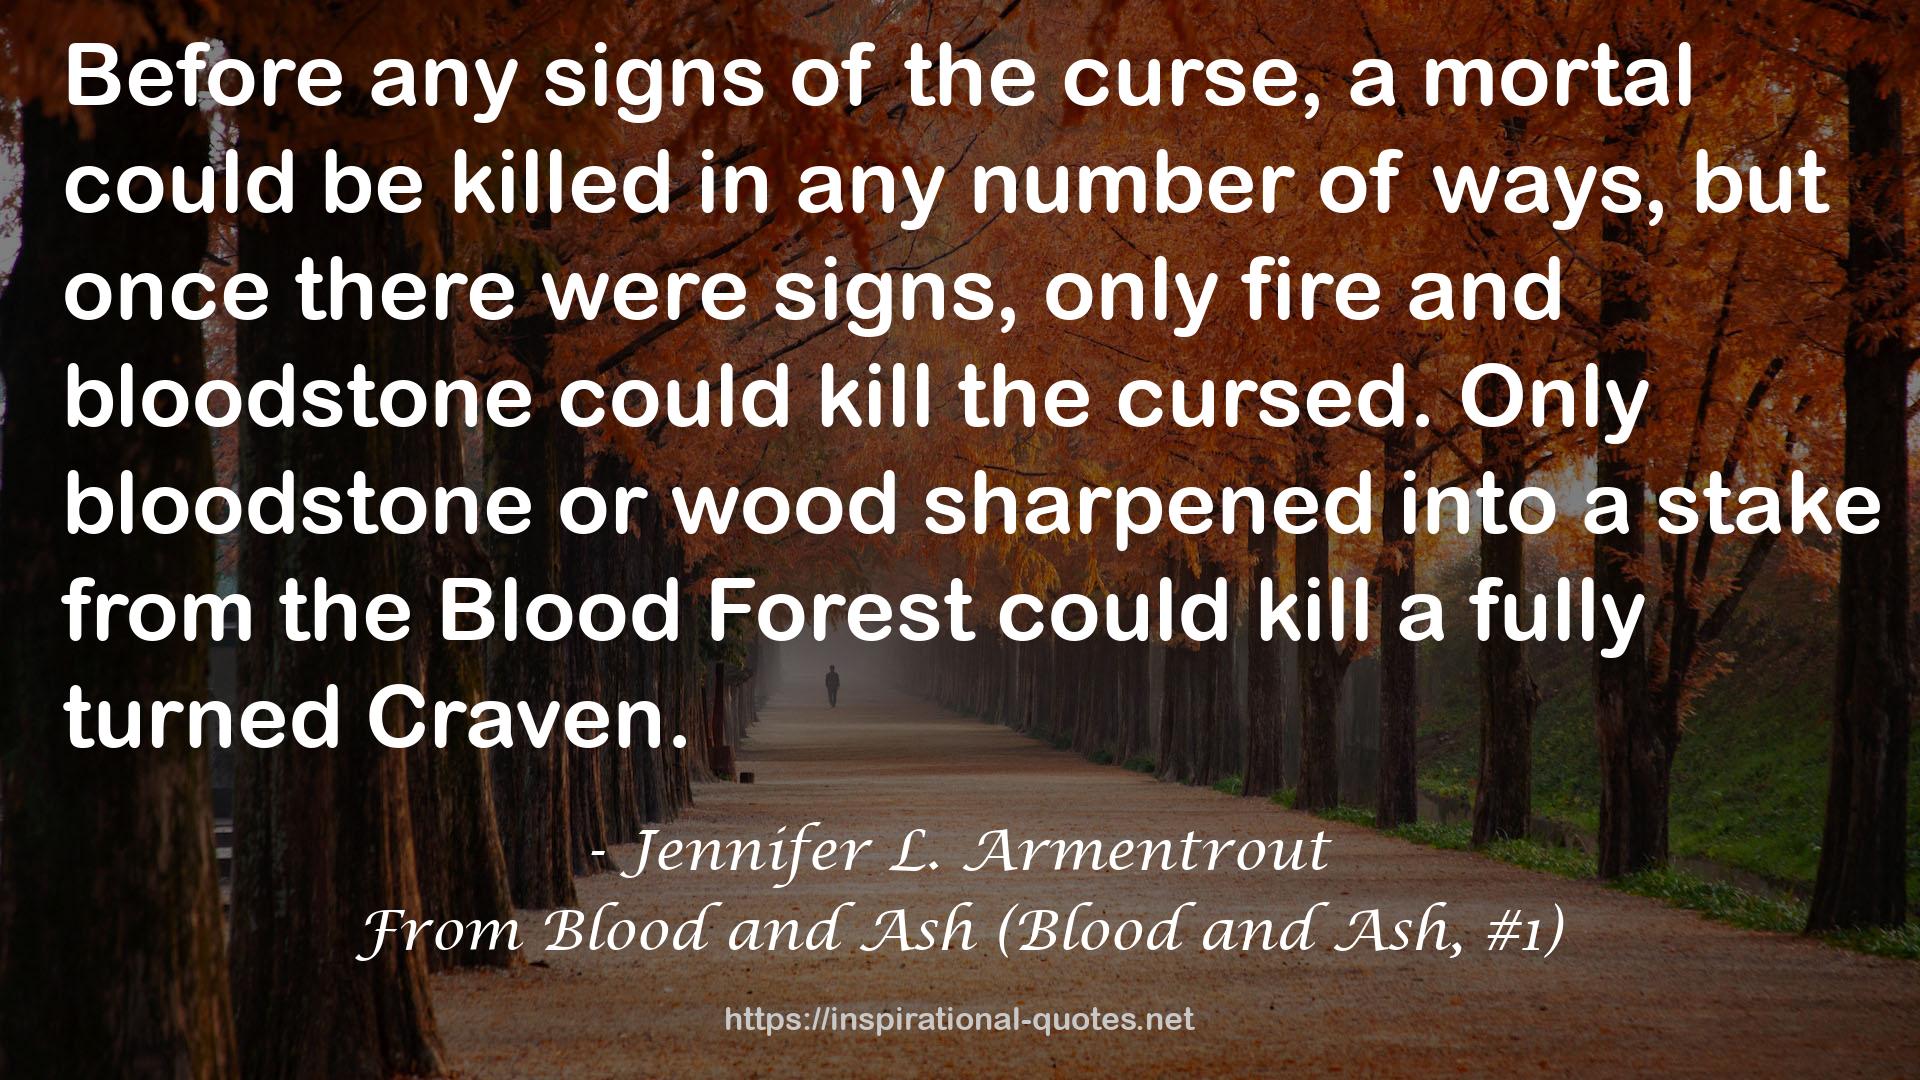 From Blood and Ash (Blood and Ash, #1) QUOTES